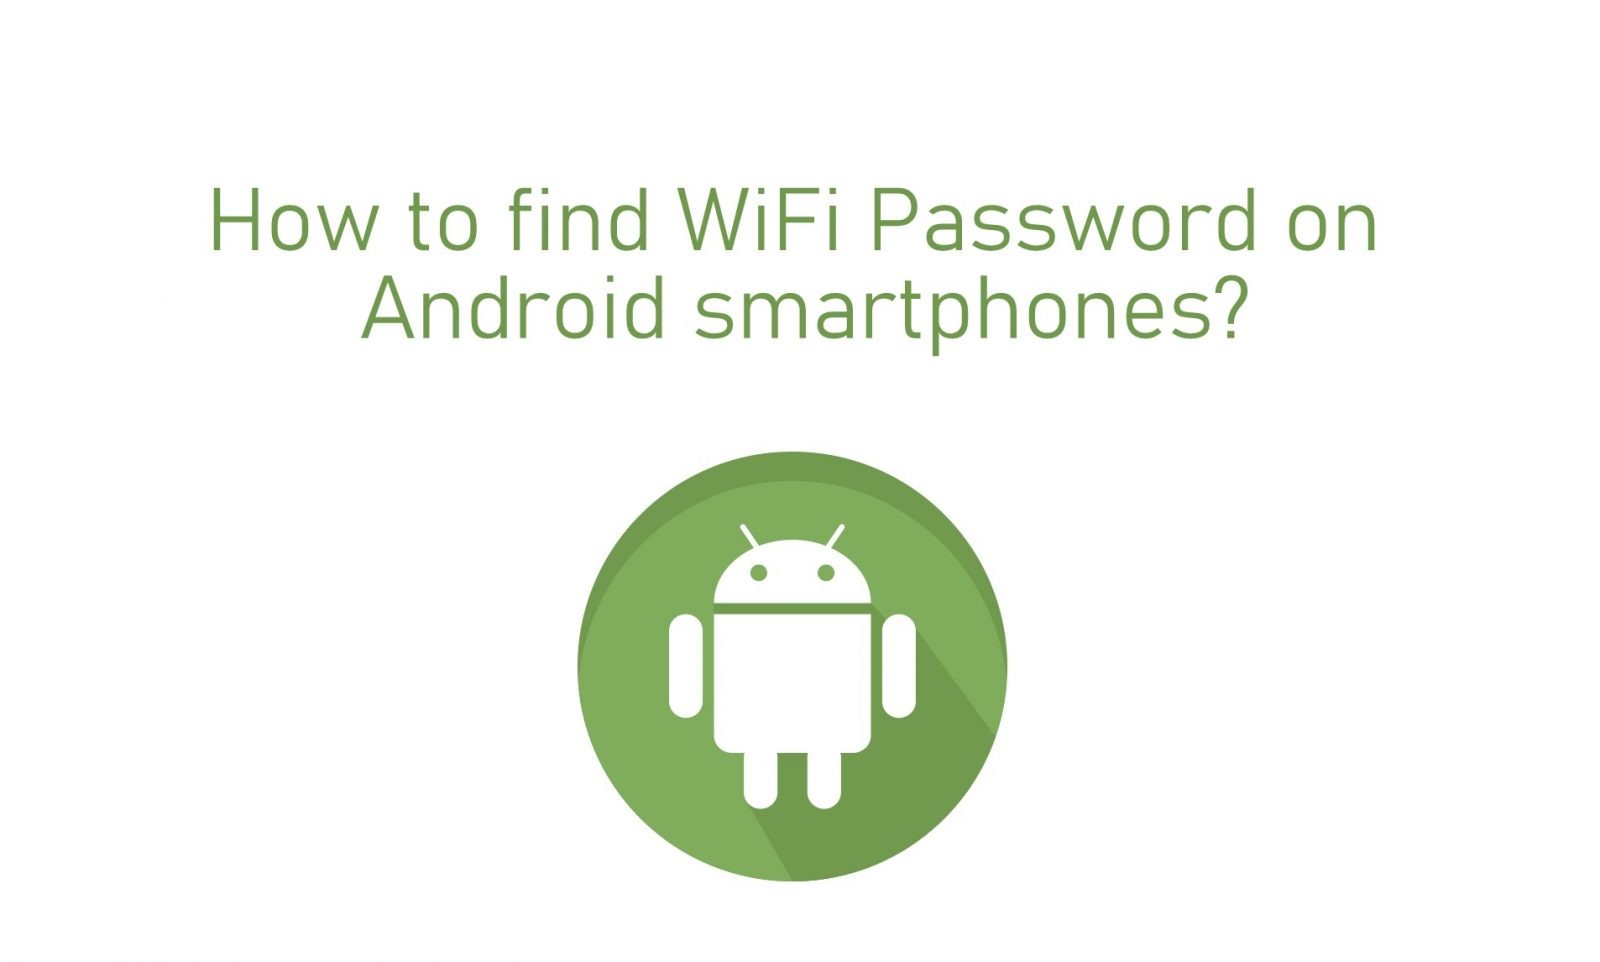 How to find WiFi Password on Android smartphones